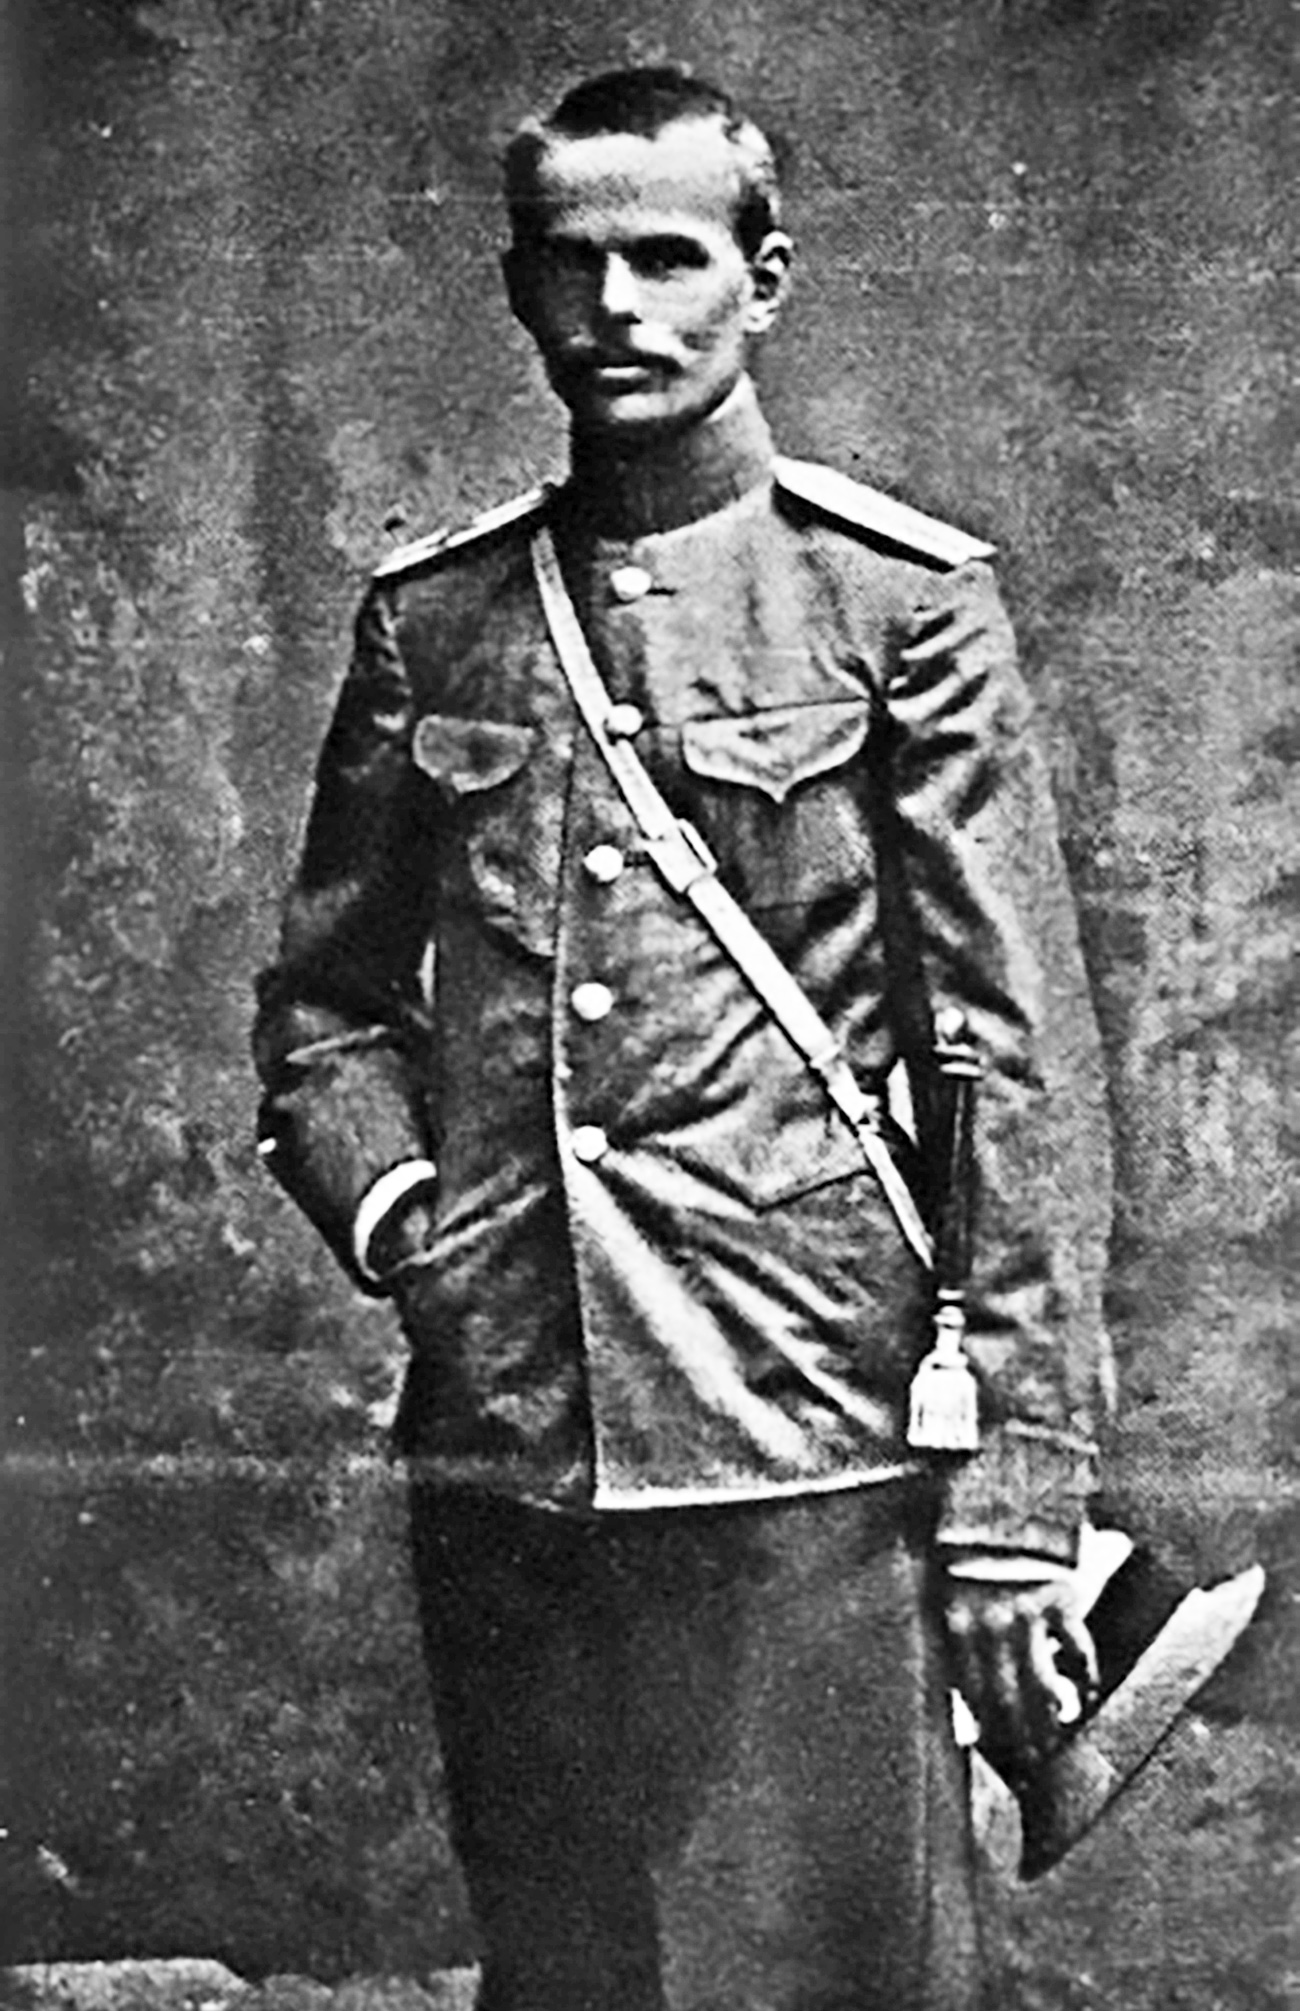 Roman von Ungern during his military service in WWI. / Archive Photo